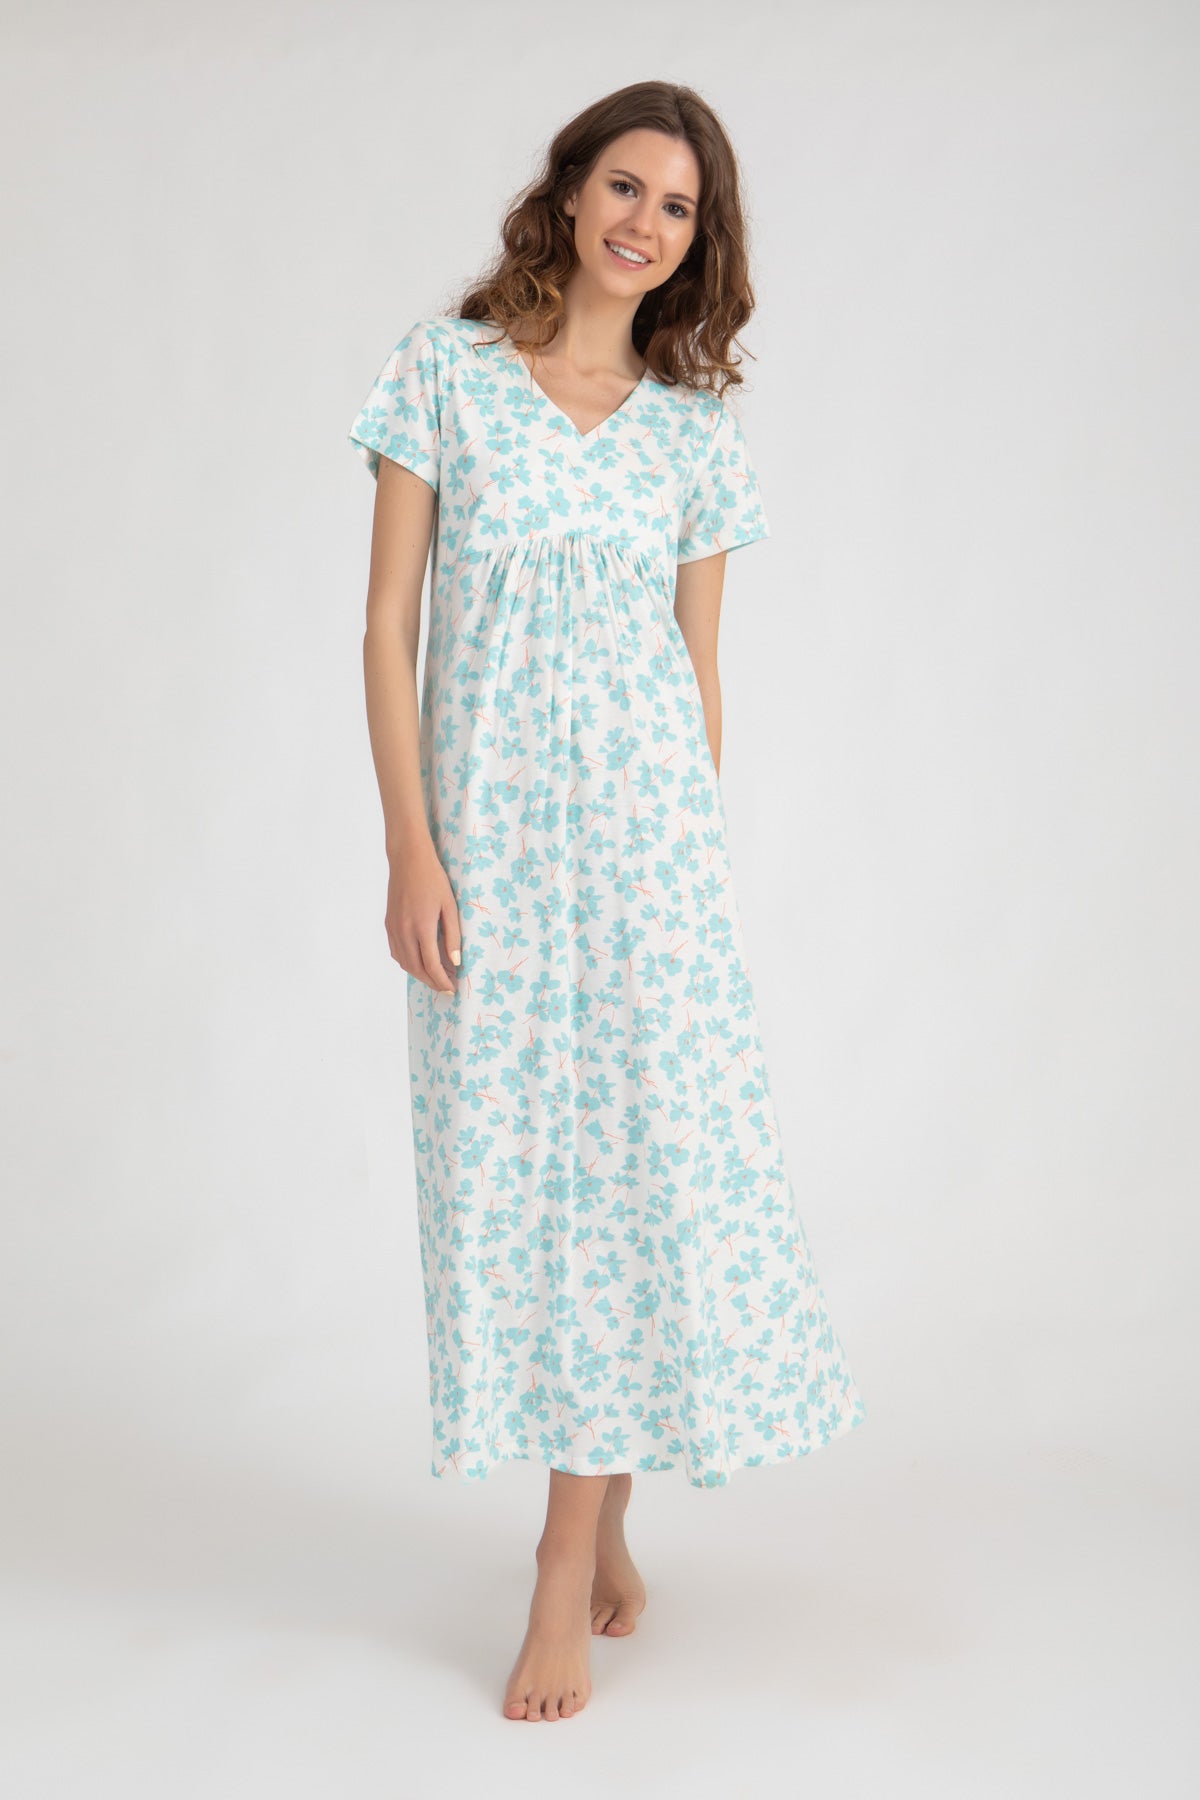 Ditsy Floral Print Nightgown with gathering